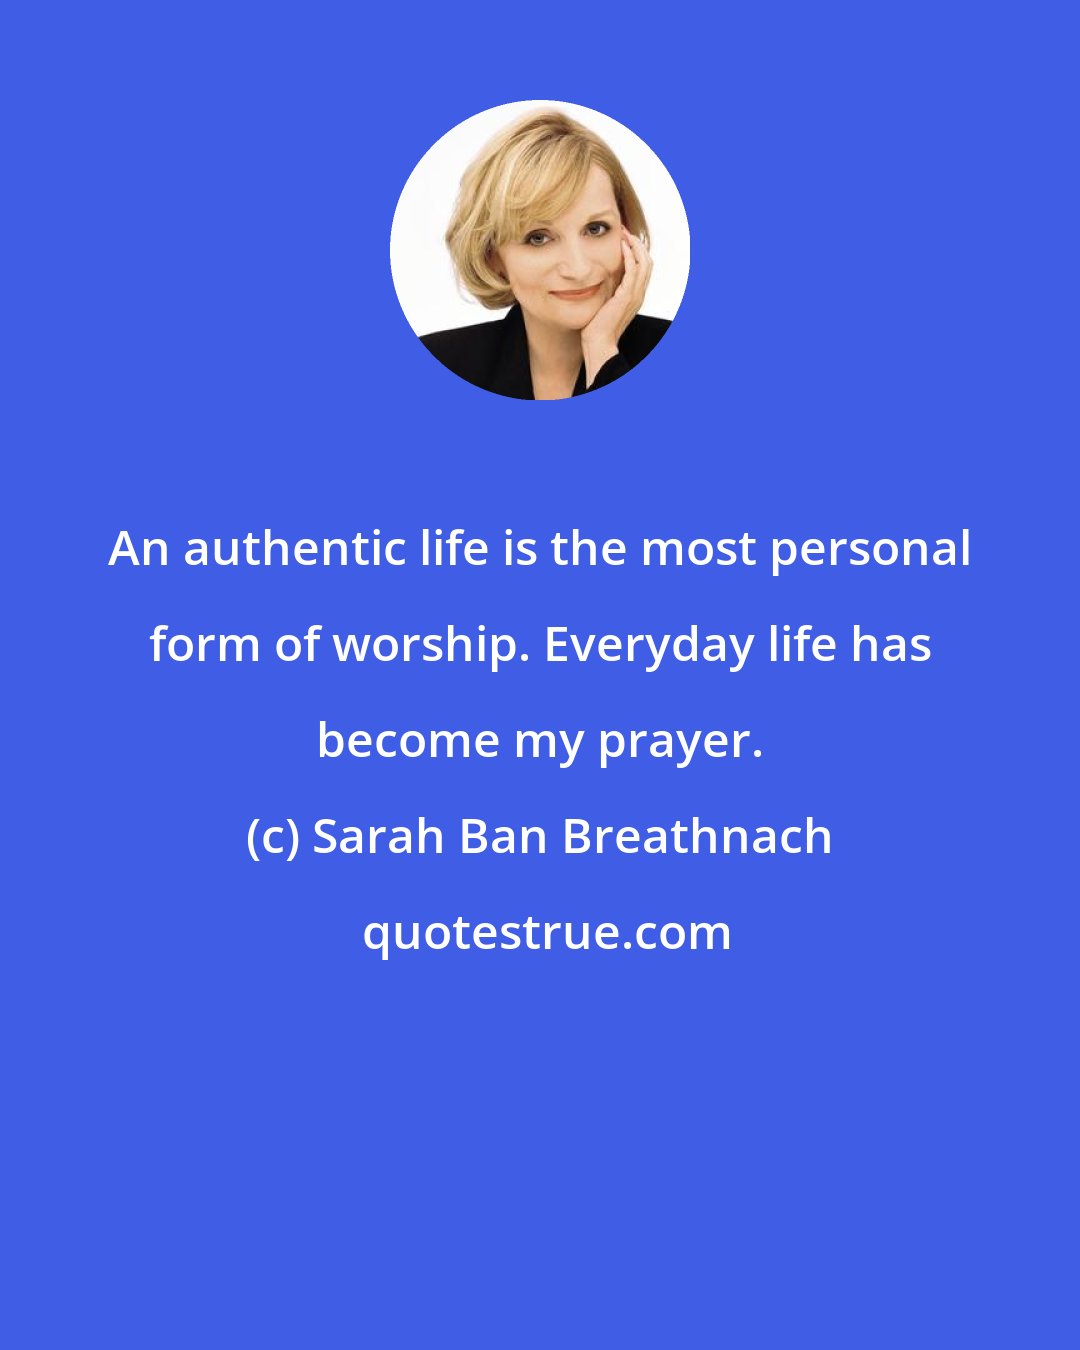 Sarah Ban Breathnach: An authentic life is the most personal form of worship. Everyday life has become my prayer.